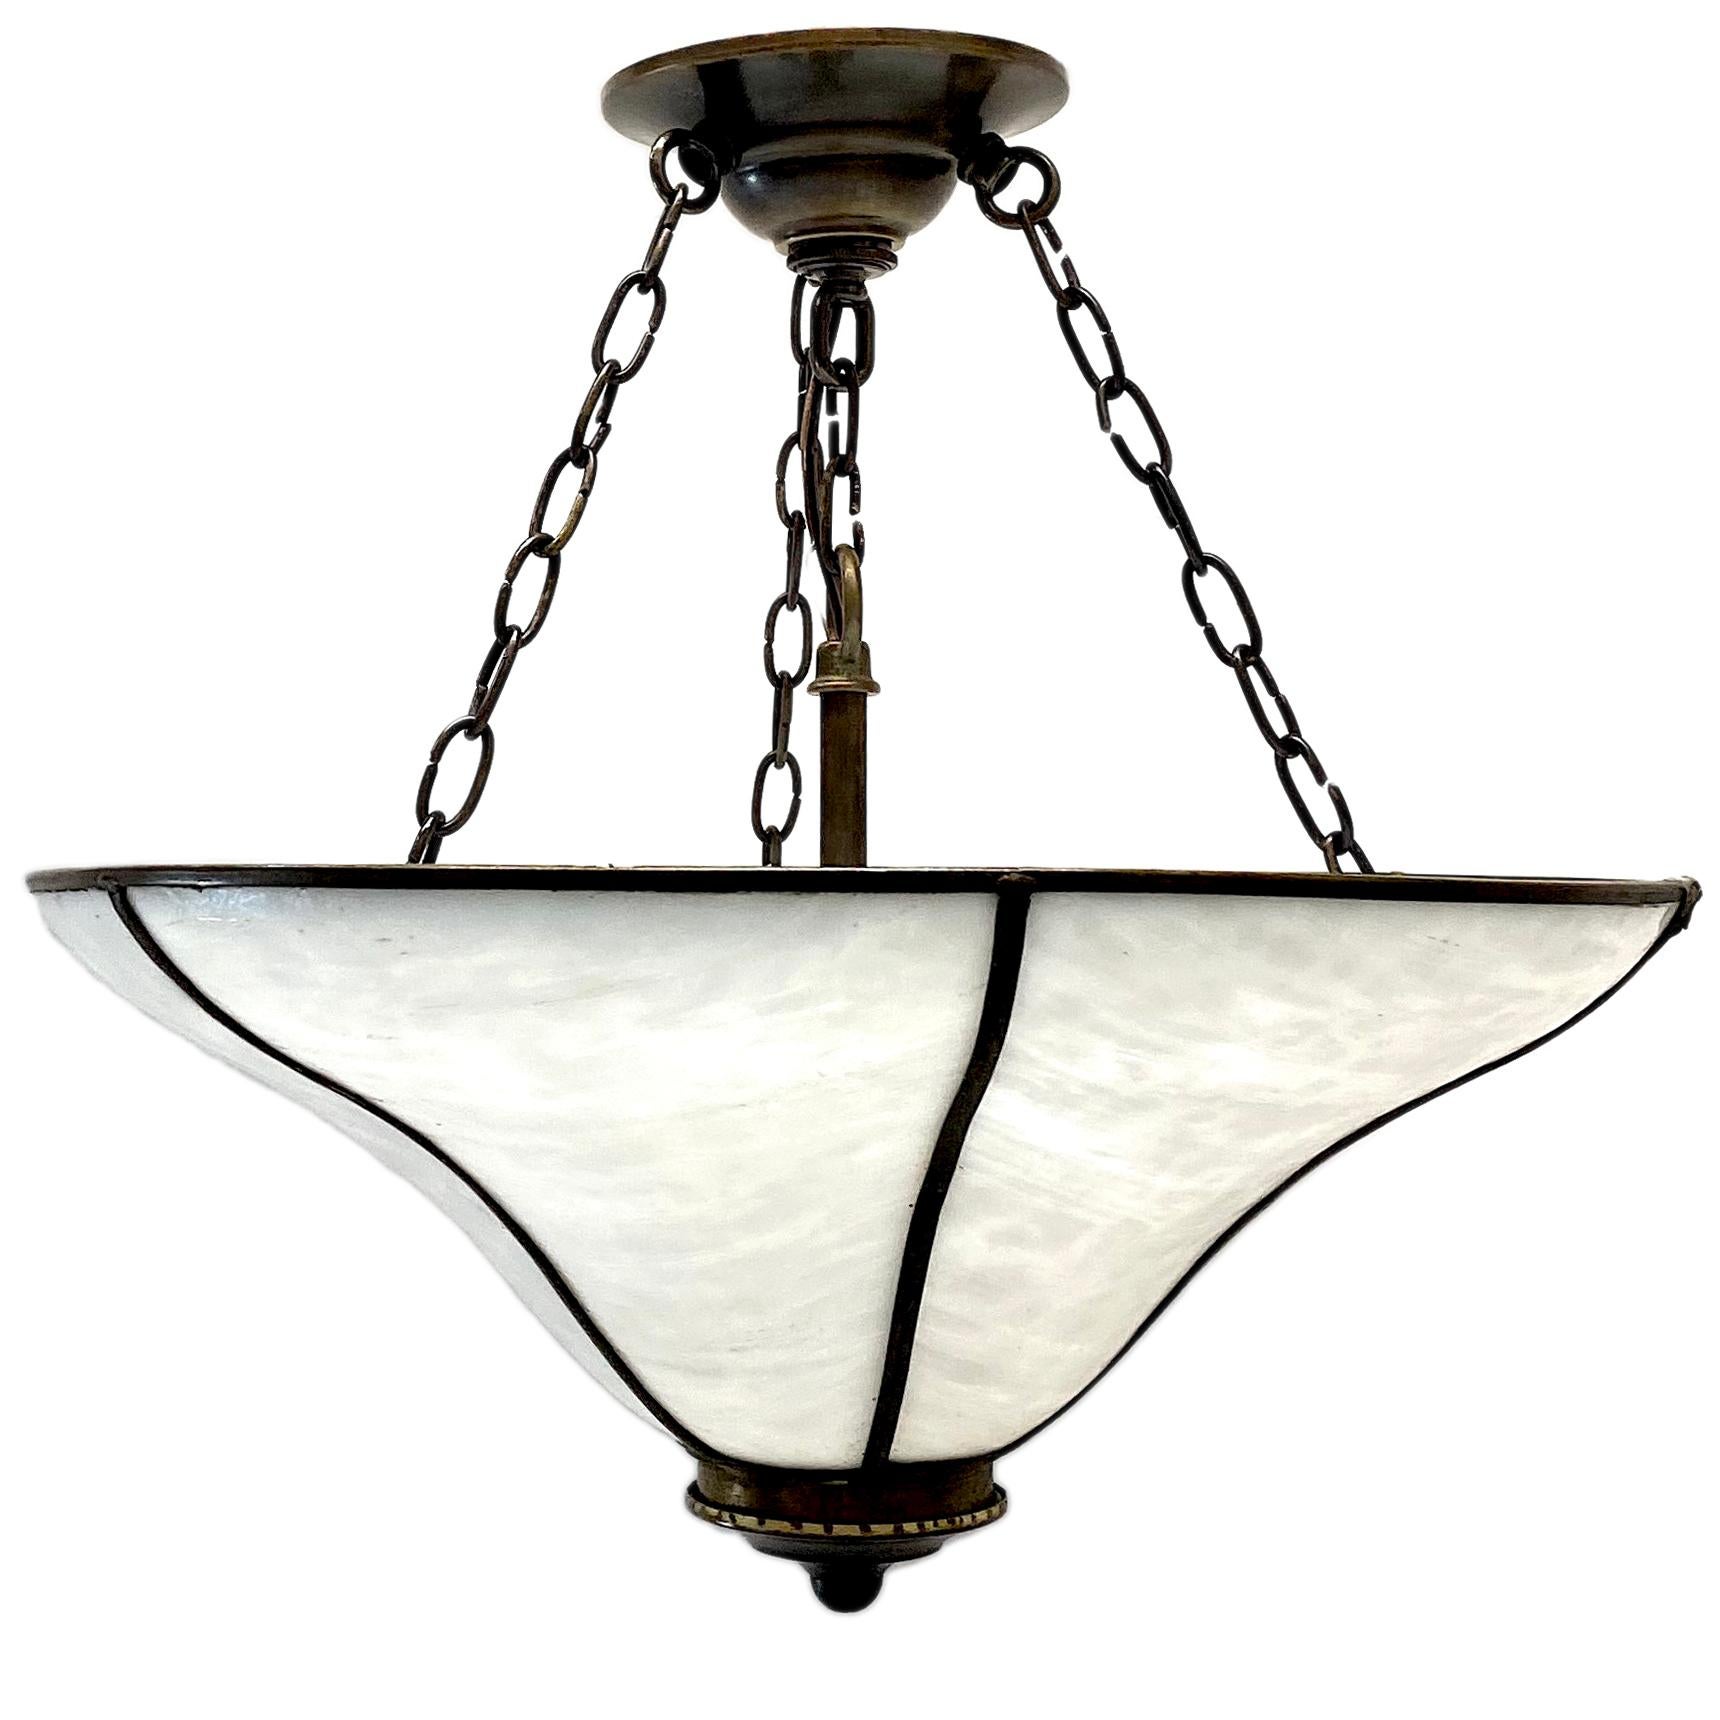 A circa 1930's English leaded glass light fixture with four interior lights.

Measurements:
Diameter: 17